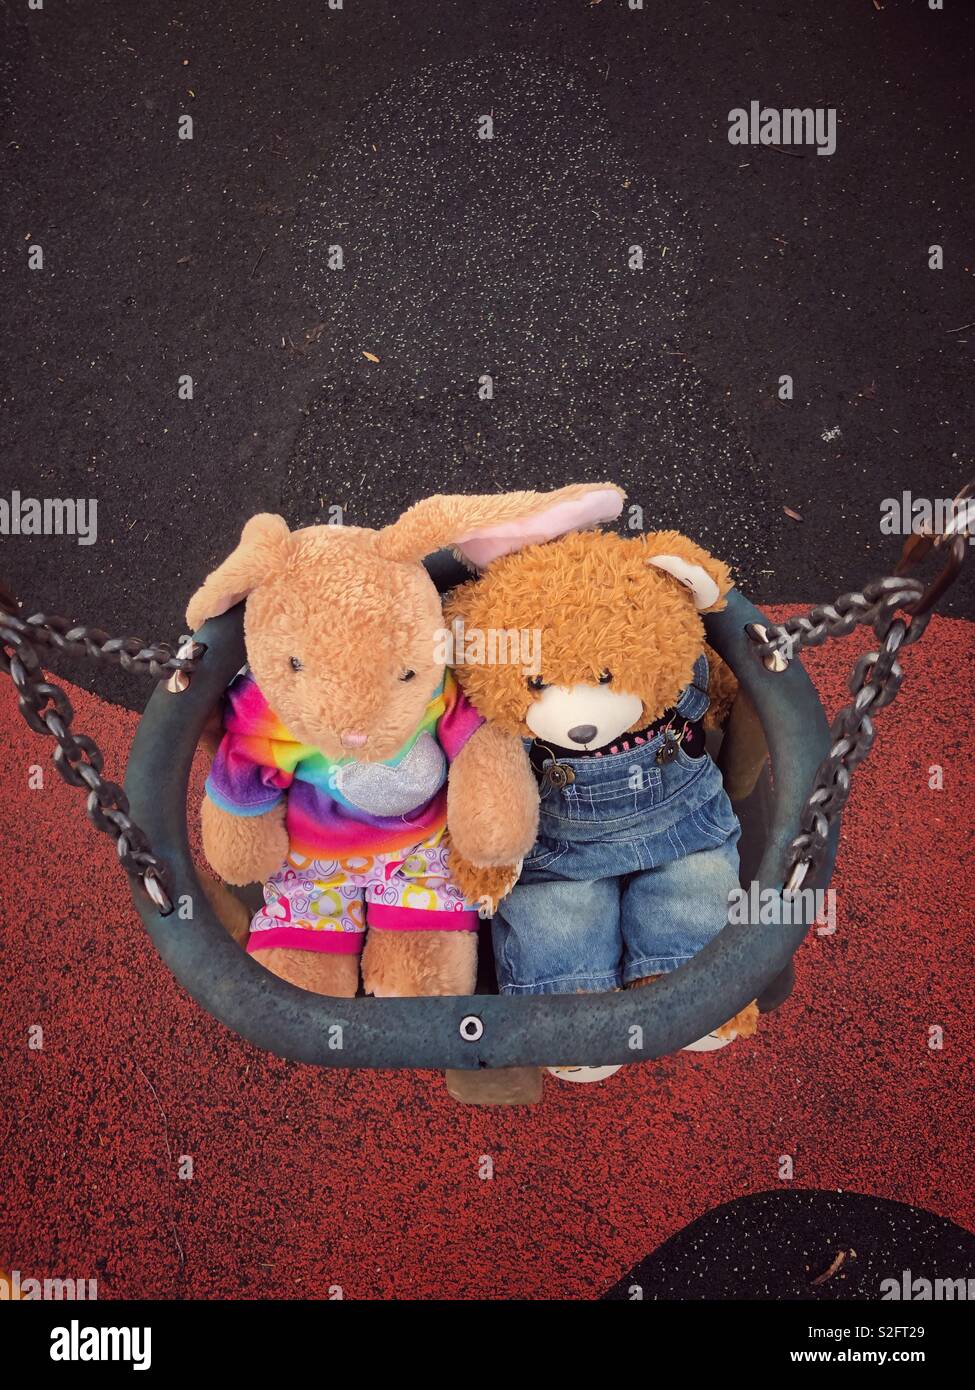 2 build-a-bear teddies in a baby swing in a park Stock Photo